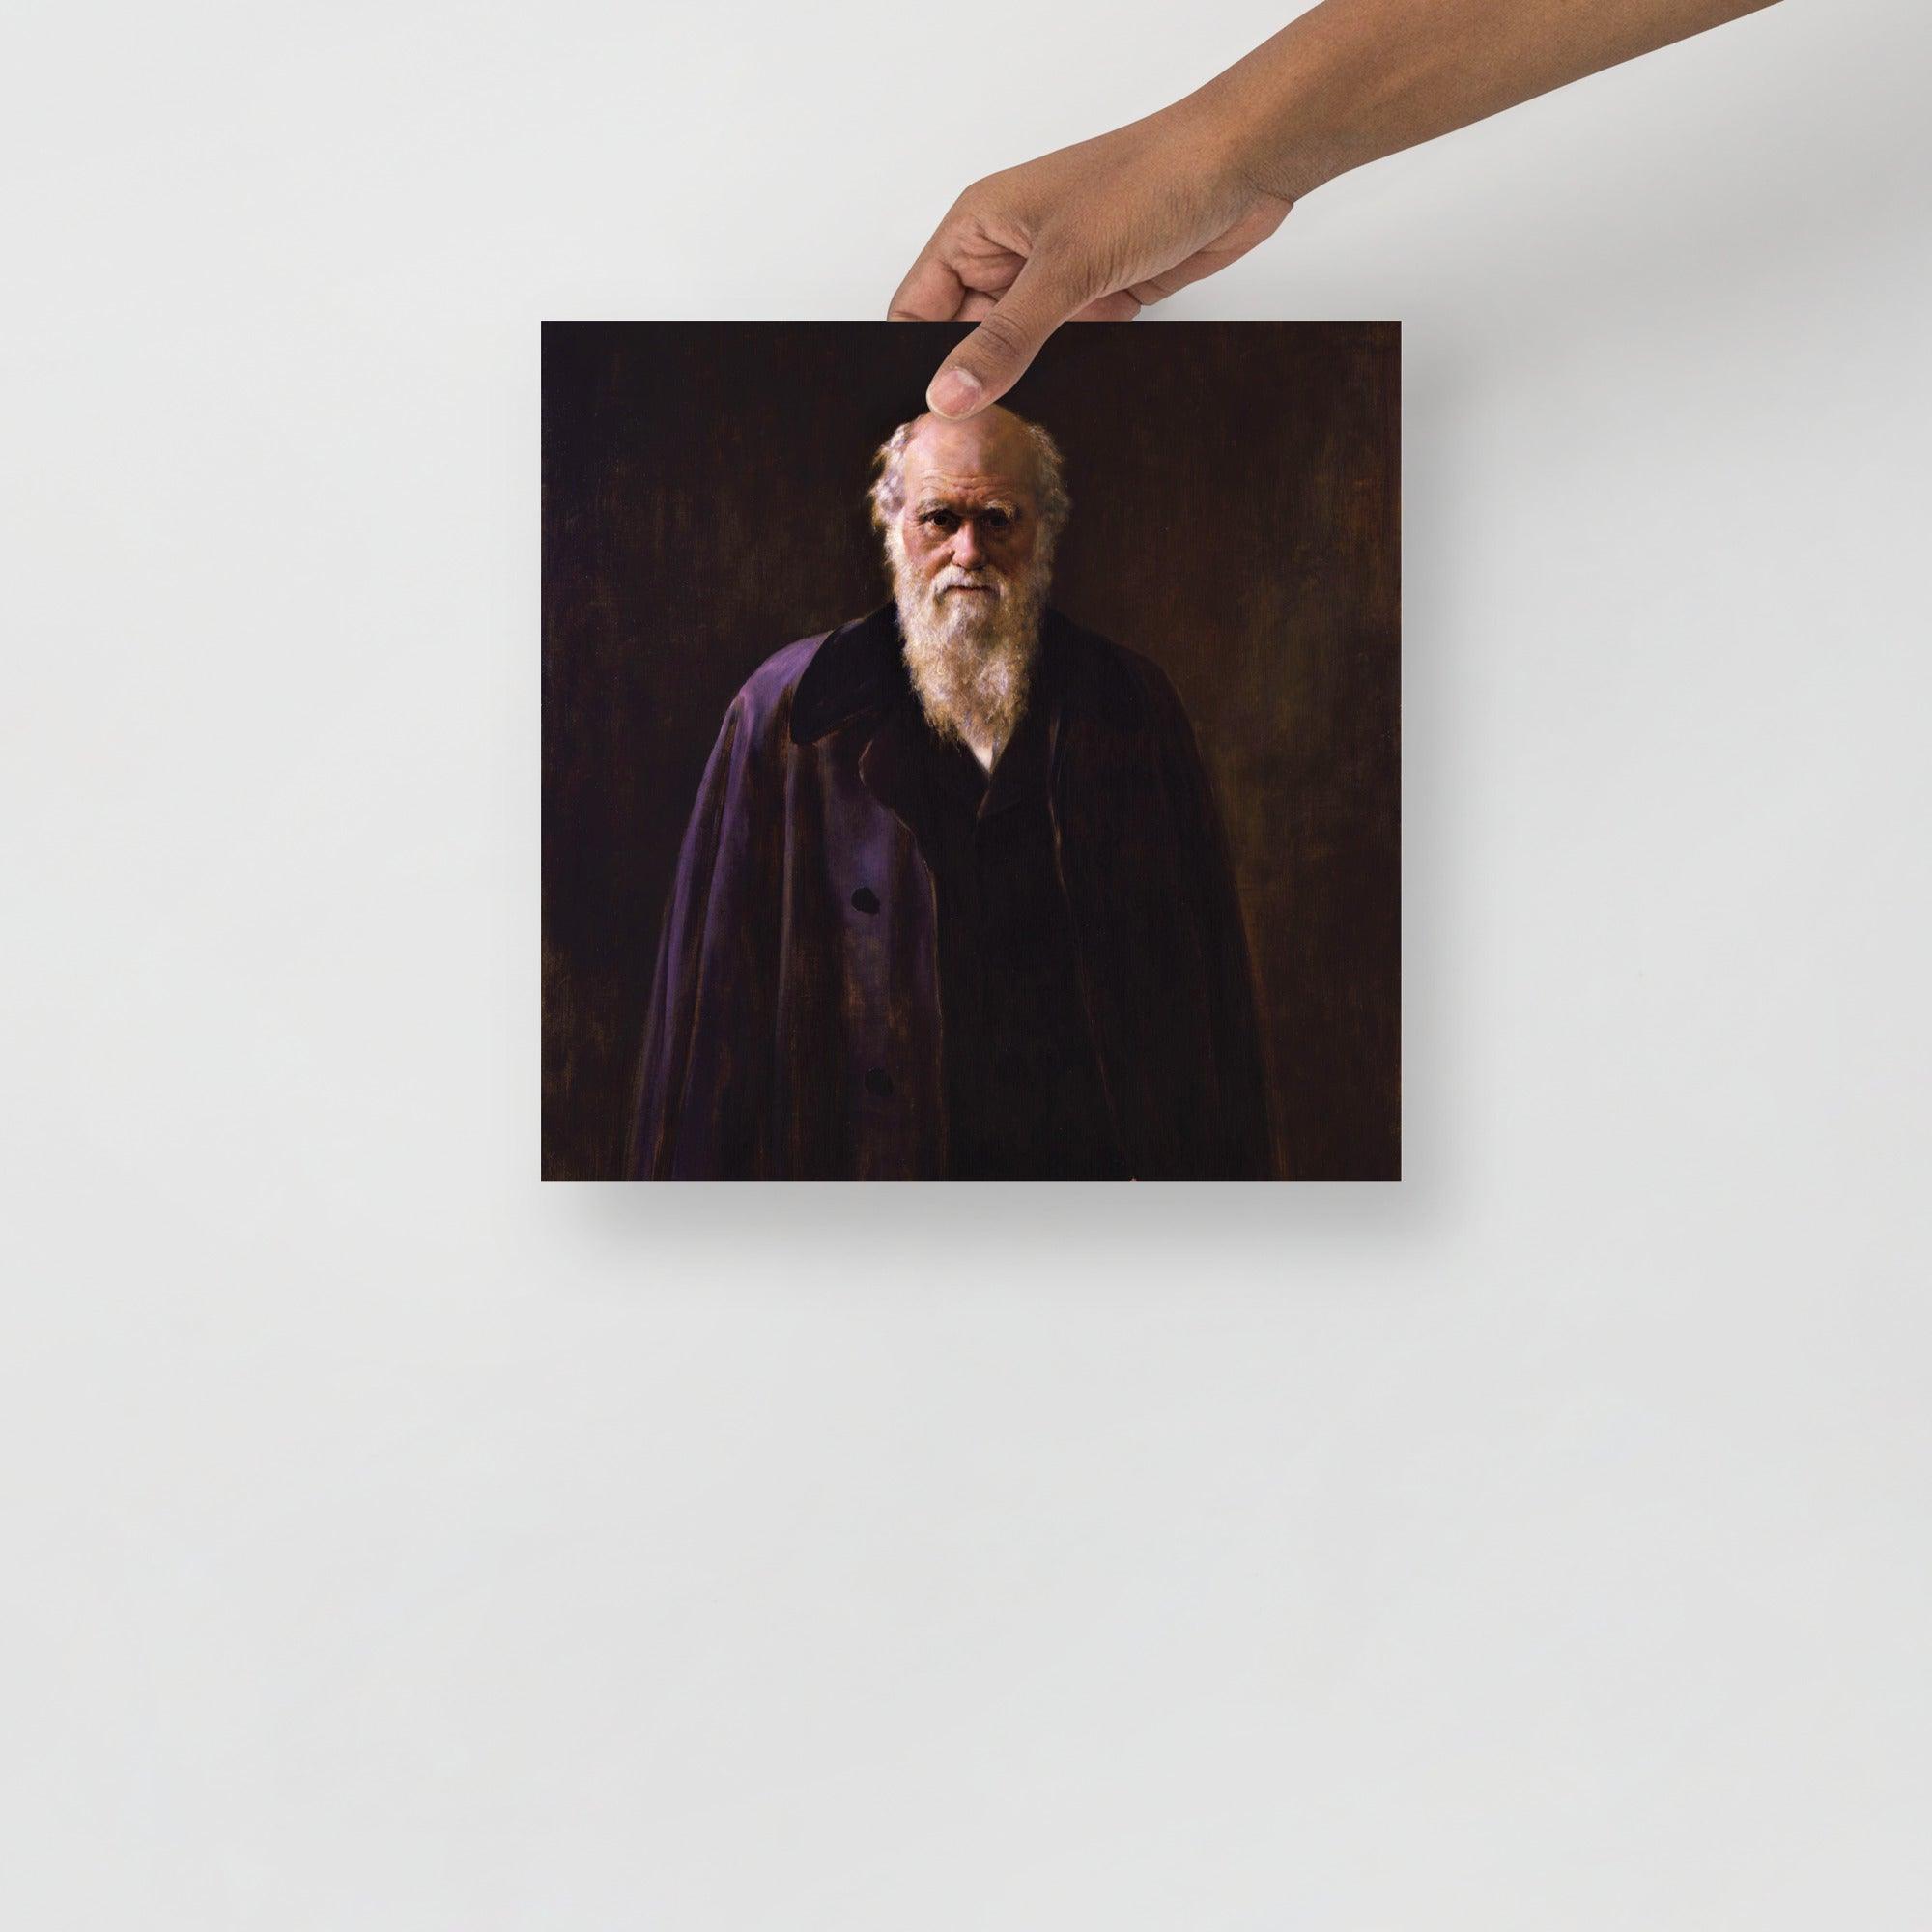 A Charles Darwin By John Collier poster on a plain backdrop in size 12x12”.